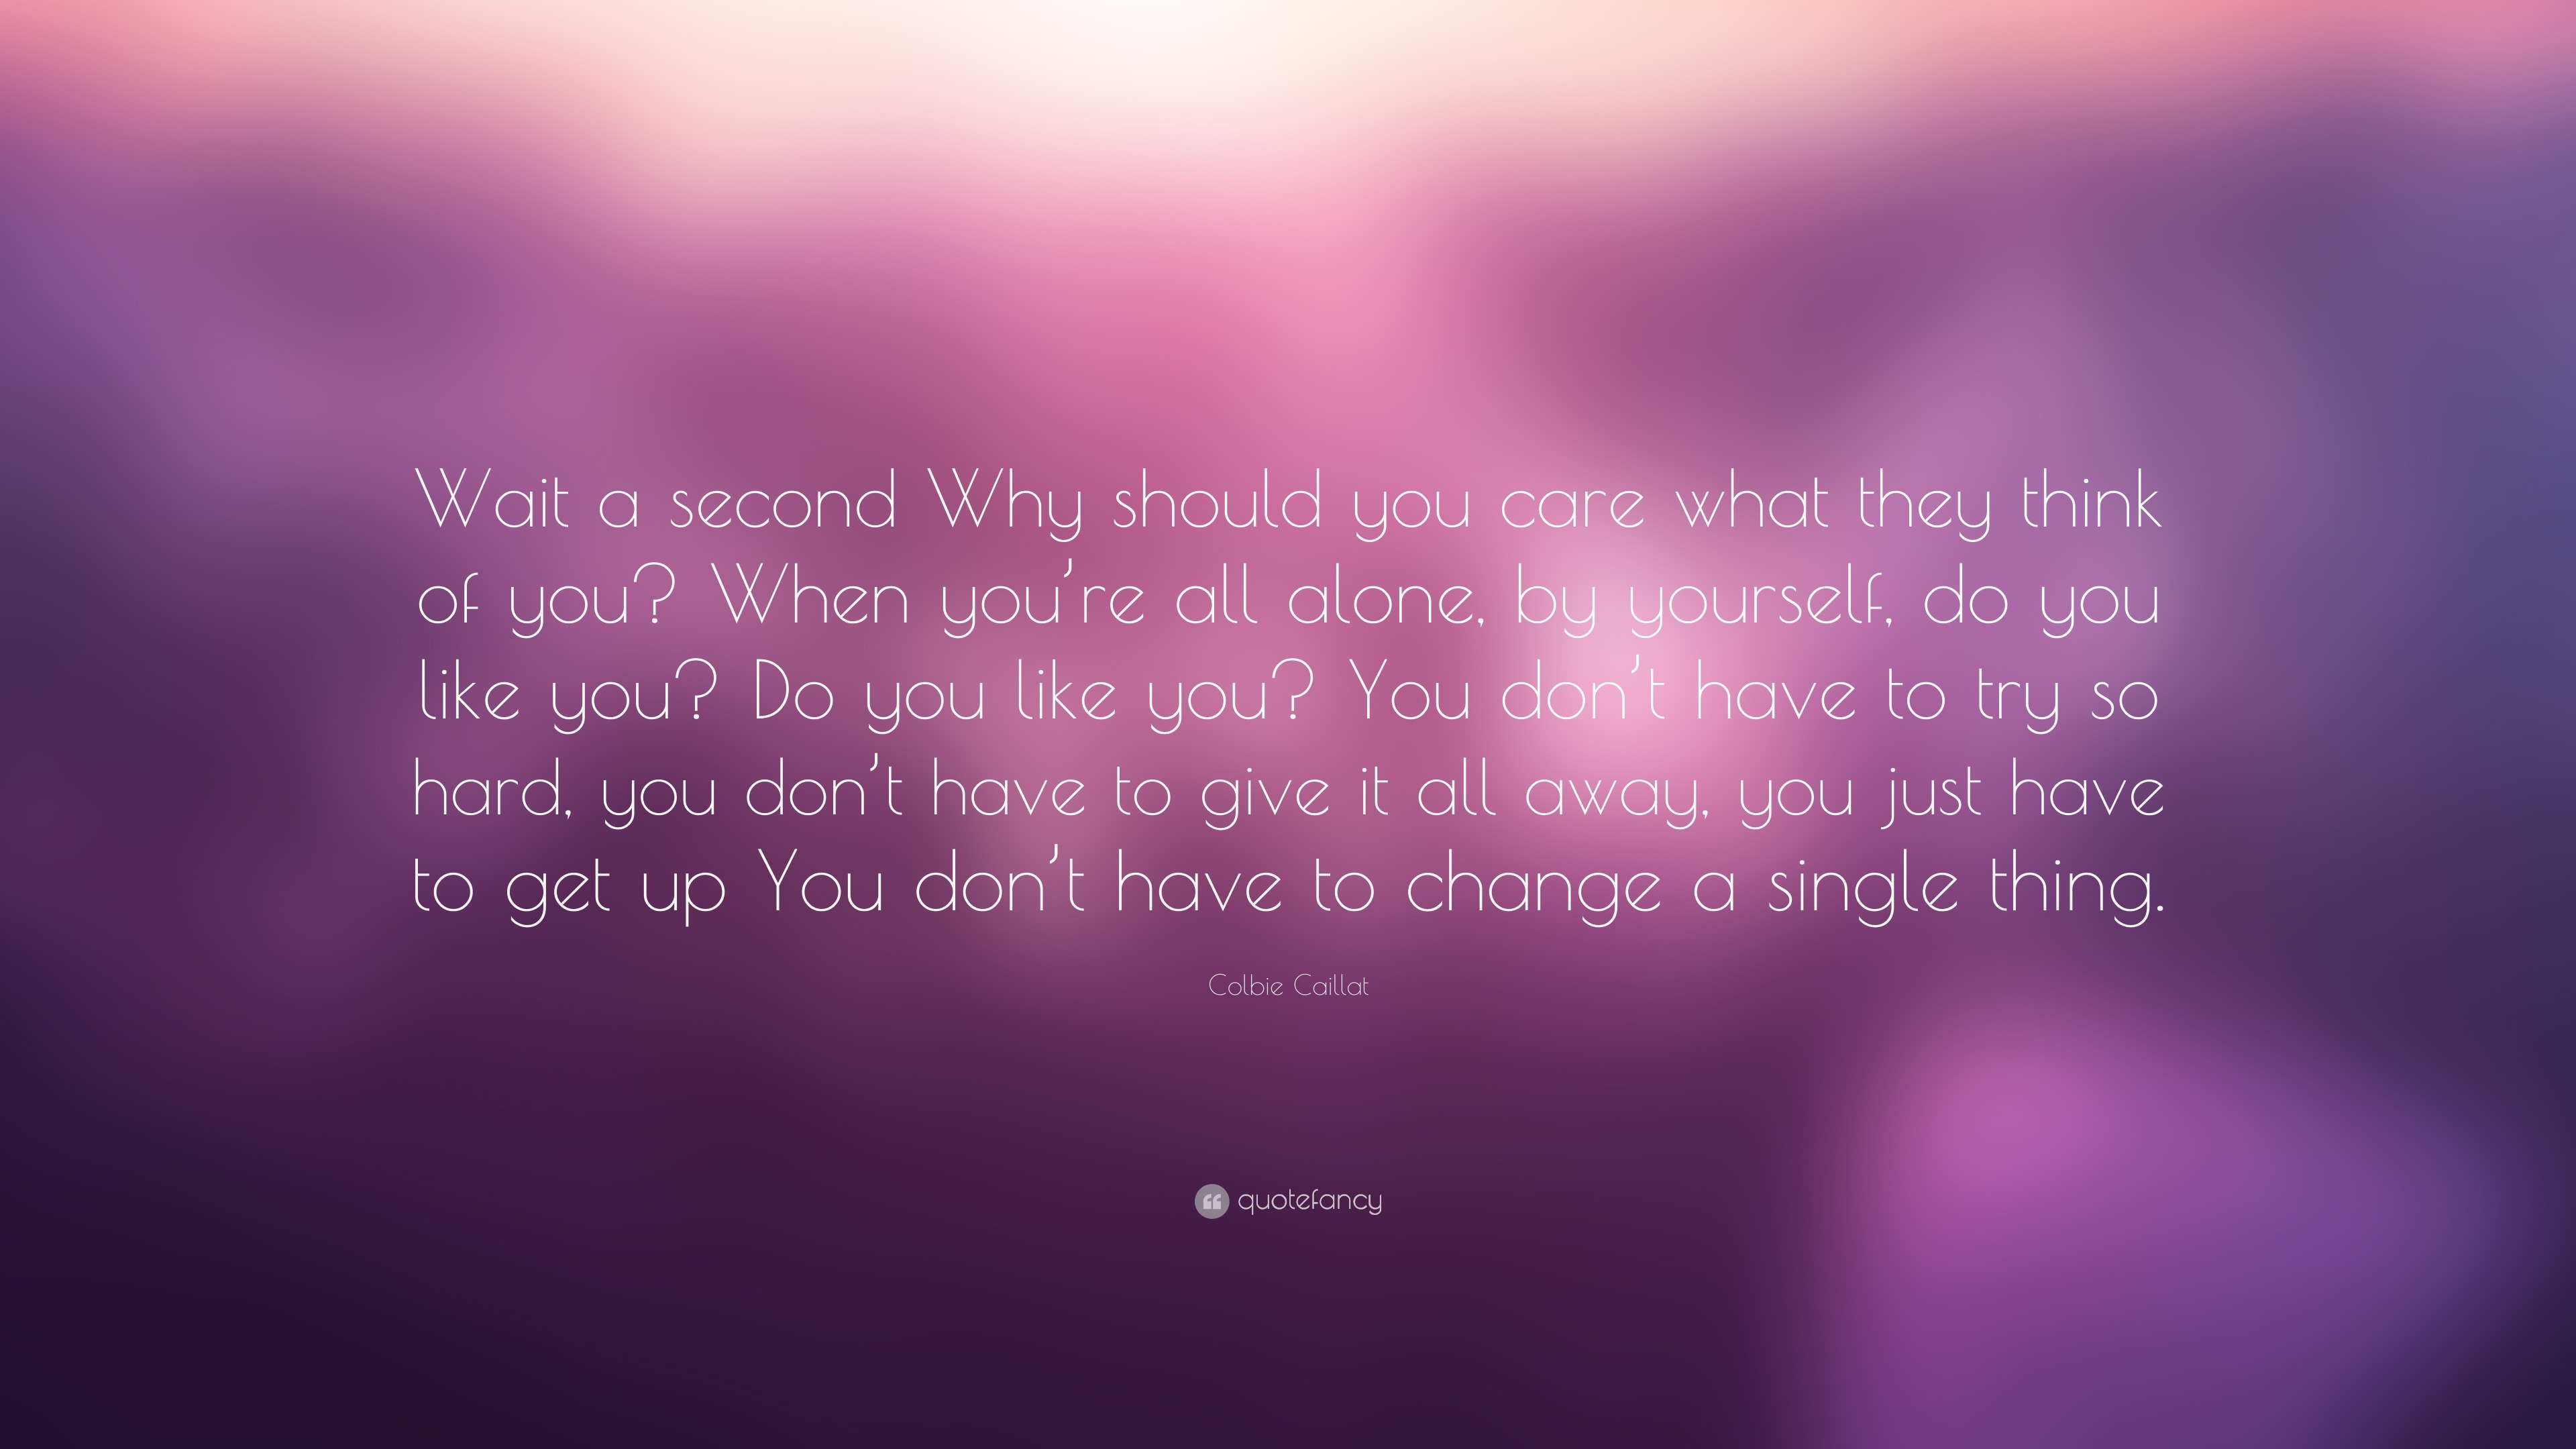 Colbie Caillat Quote: “Wait a second Why should you care what they ...